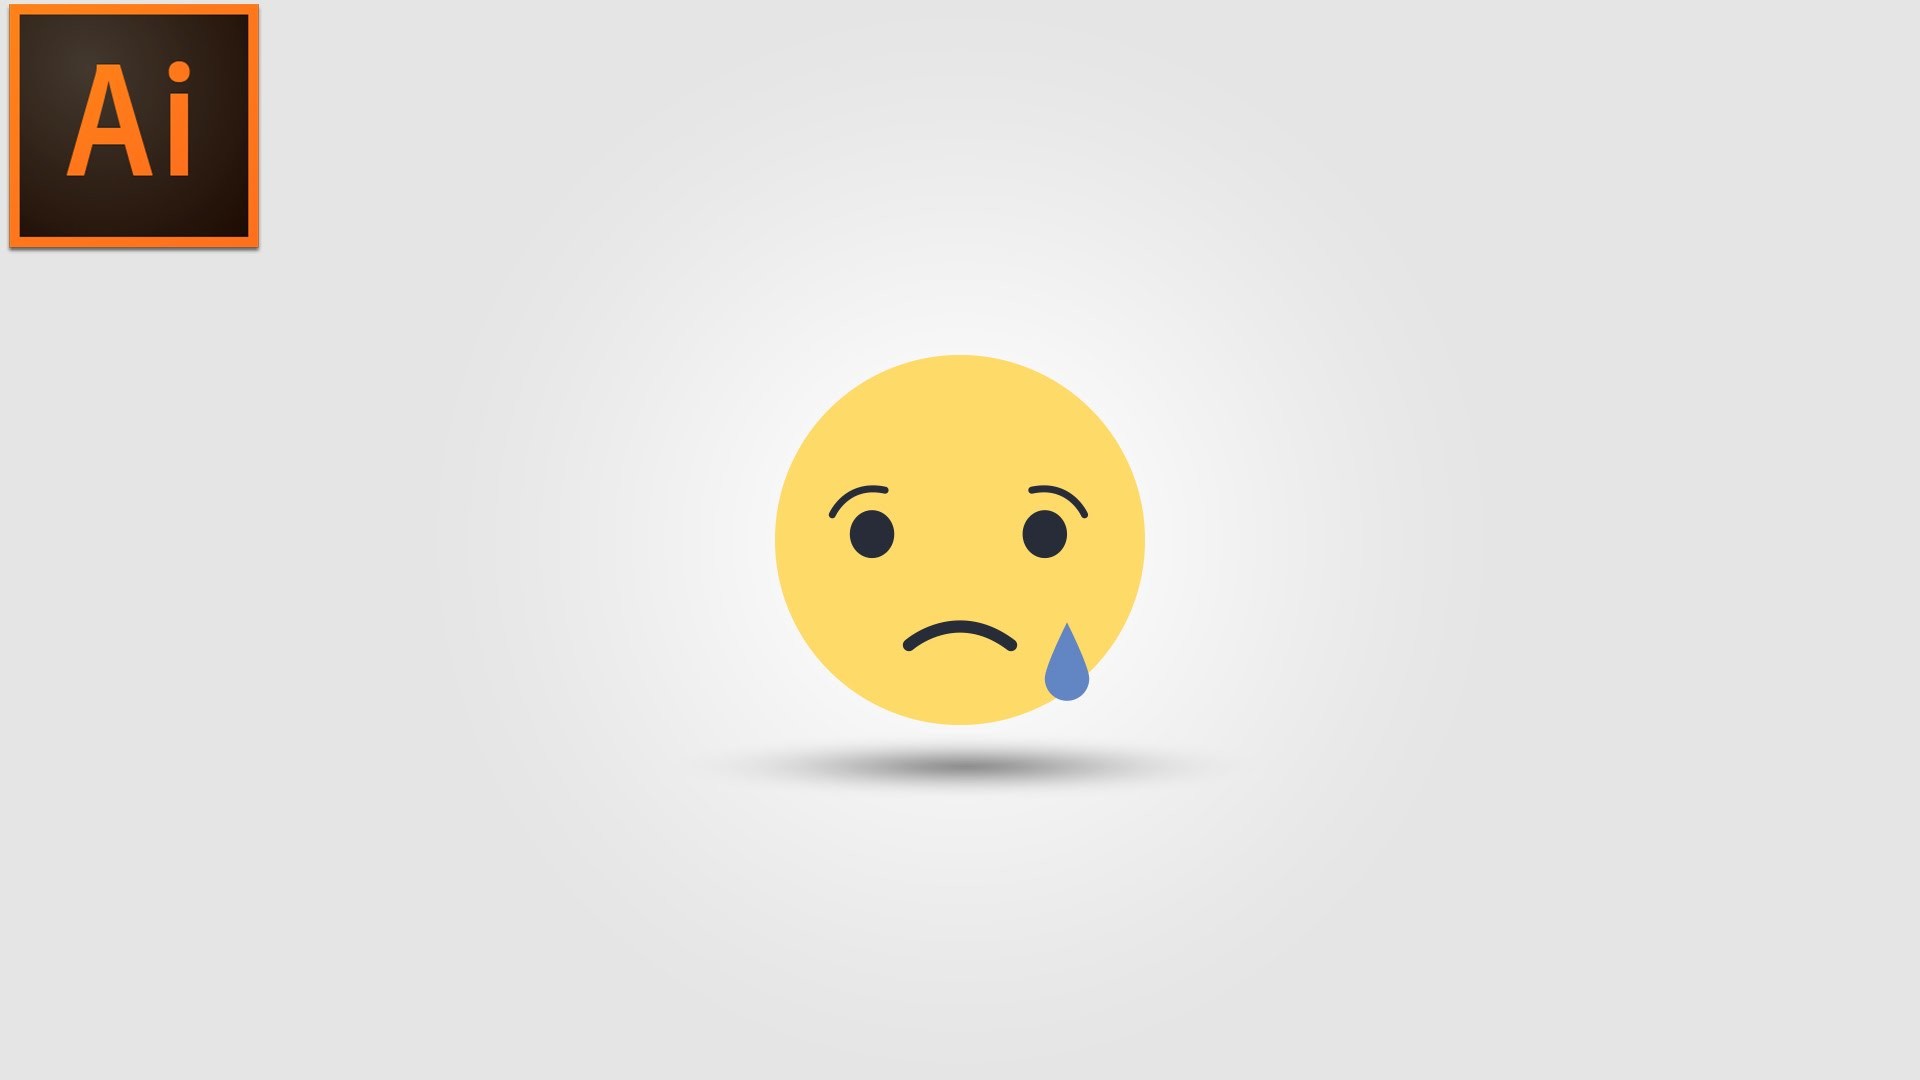 1920x1080 Sad Emoji HD Wallpapers HD Wallpapers Pictures Images FREE Downlo...